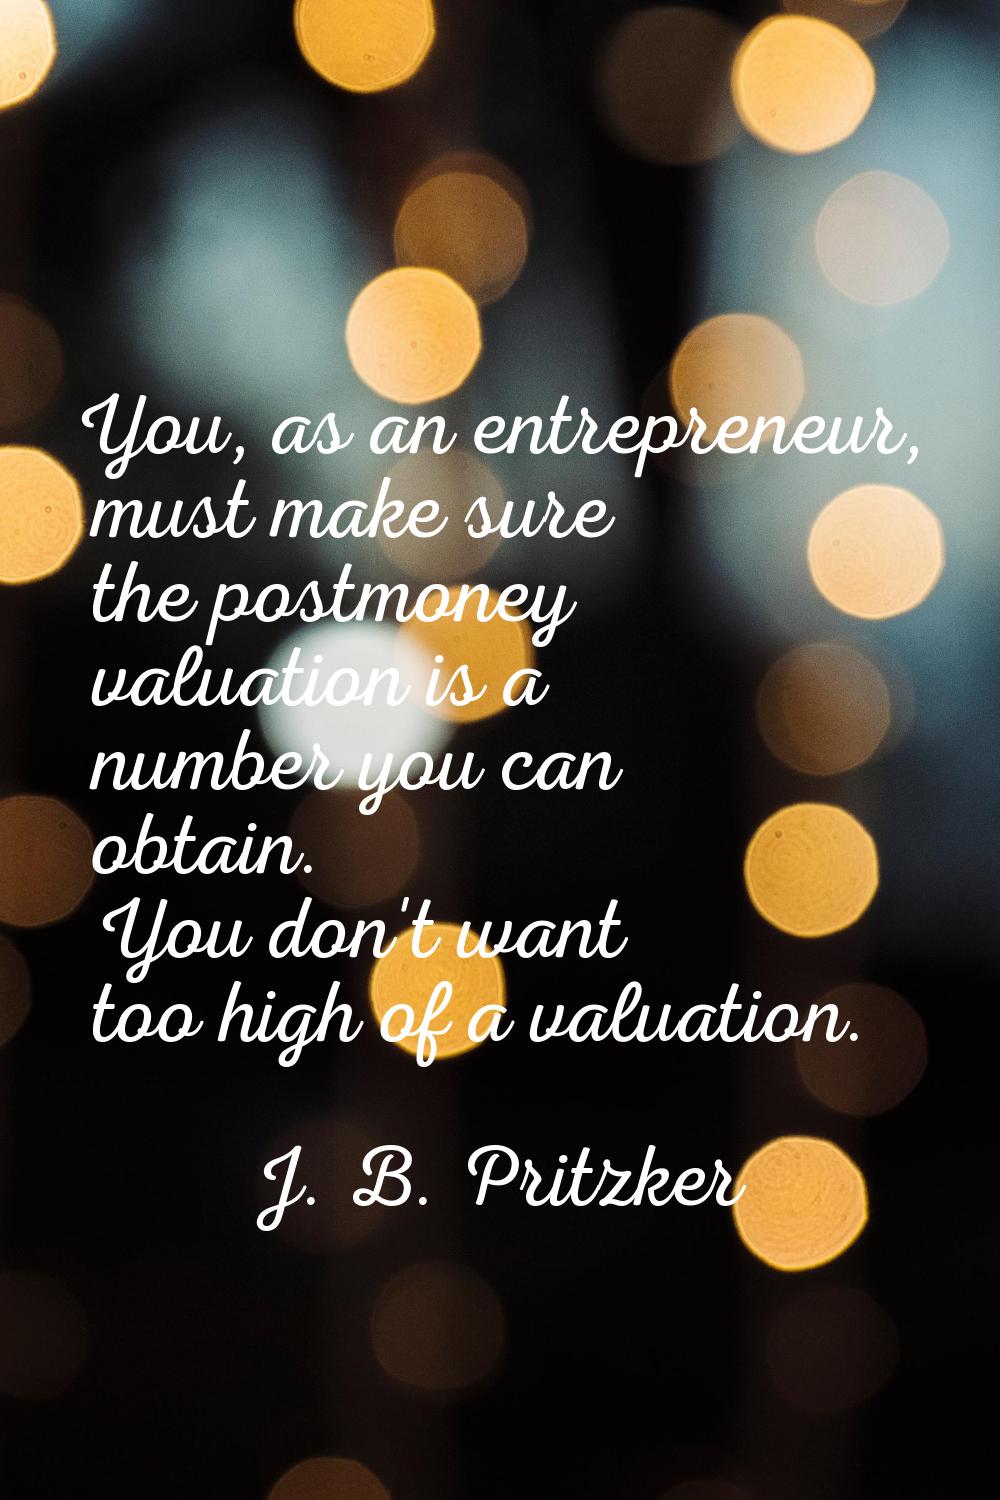 You, as an entrepreneur, must make sure the postmoney valuation is a number you can obtain. You don